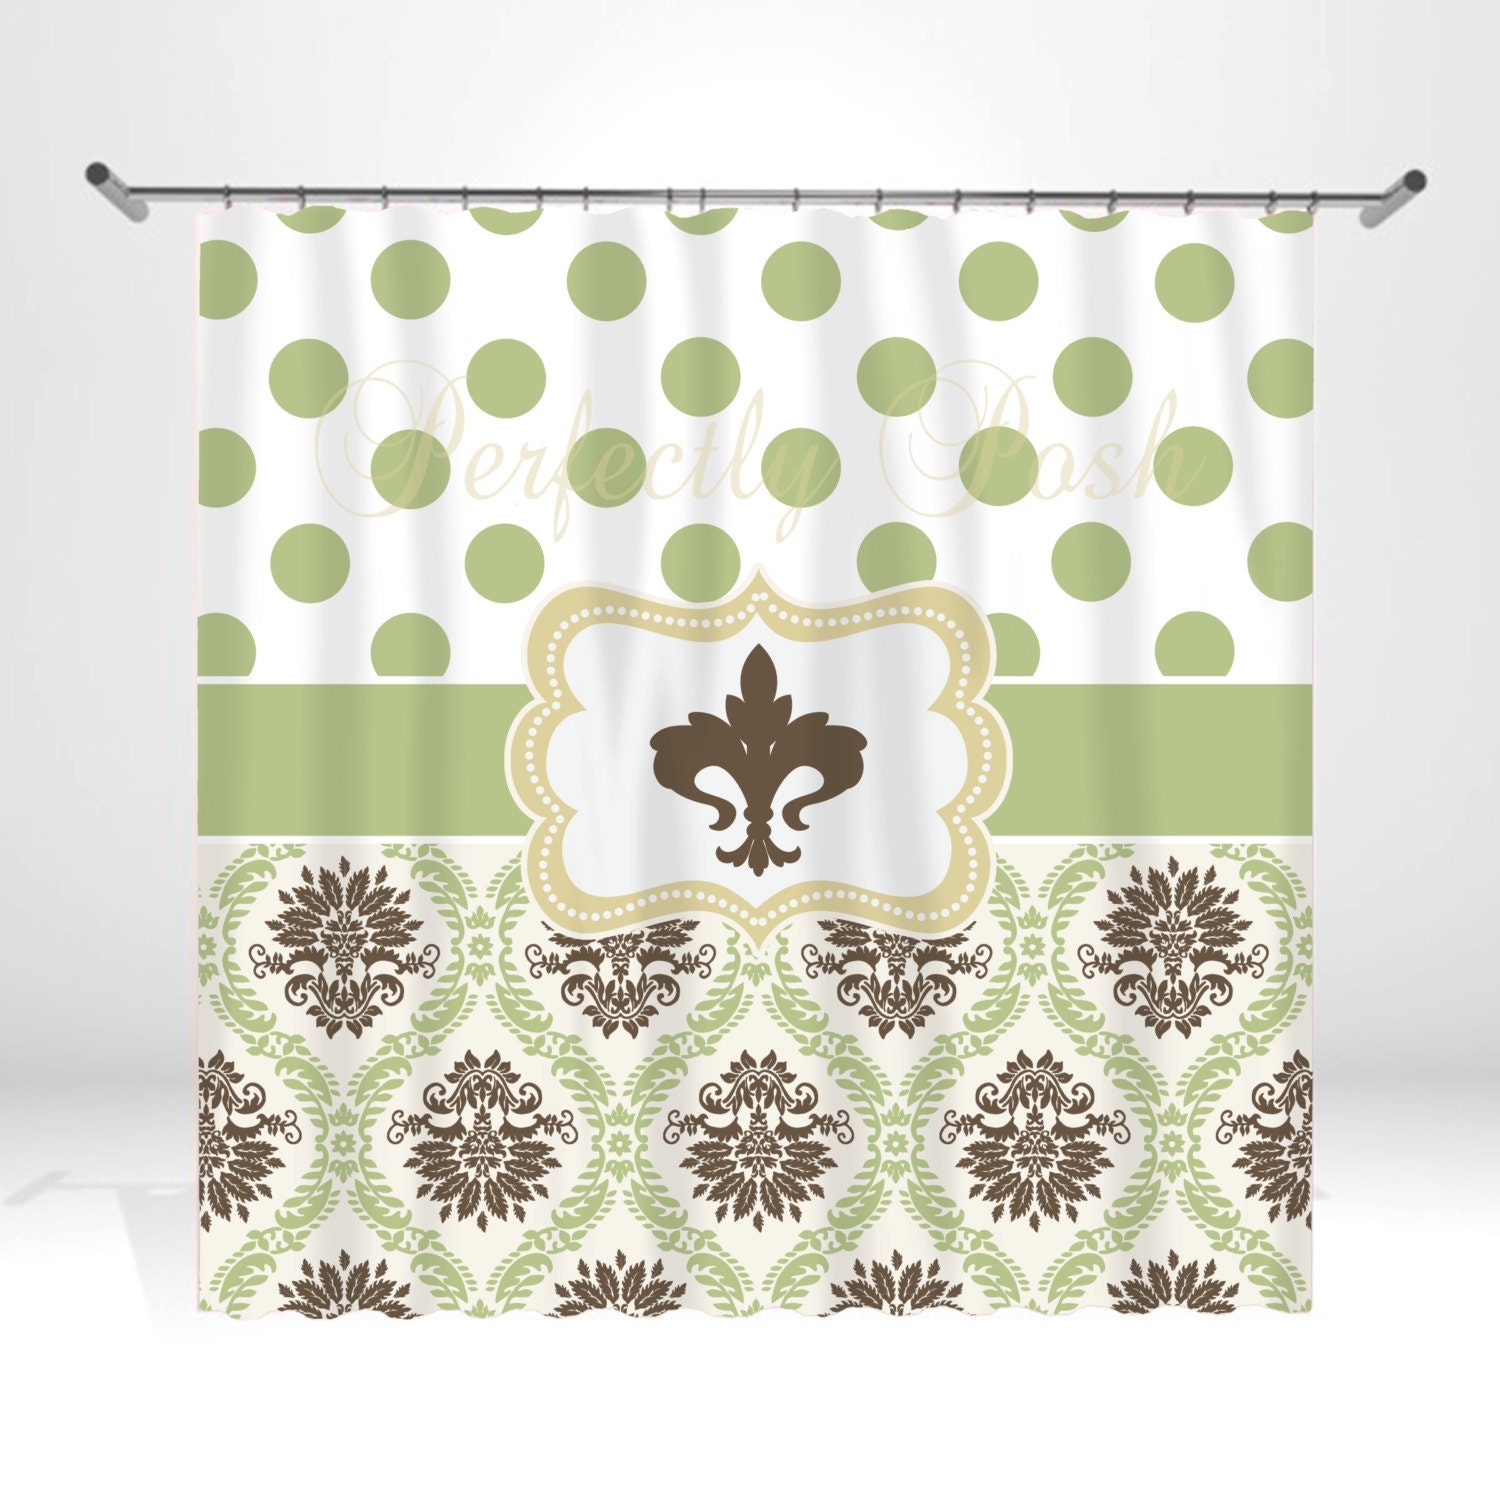 Extra Long Shower Curtain Rod